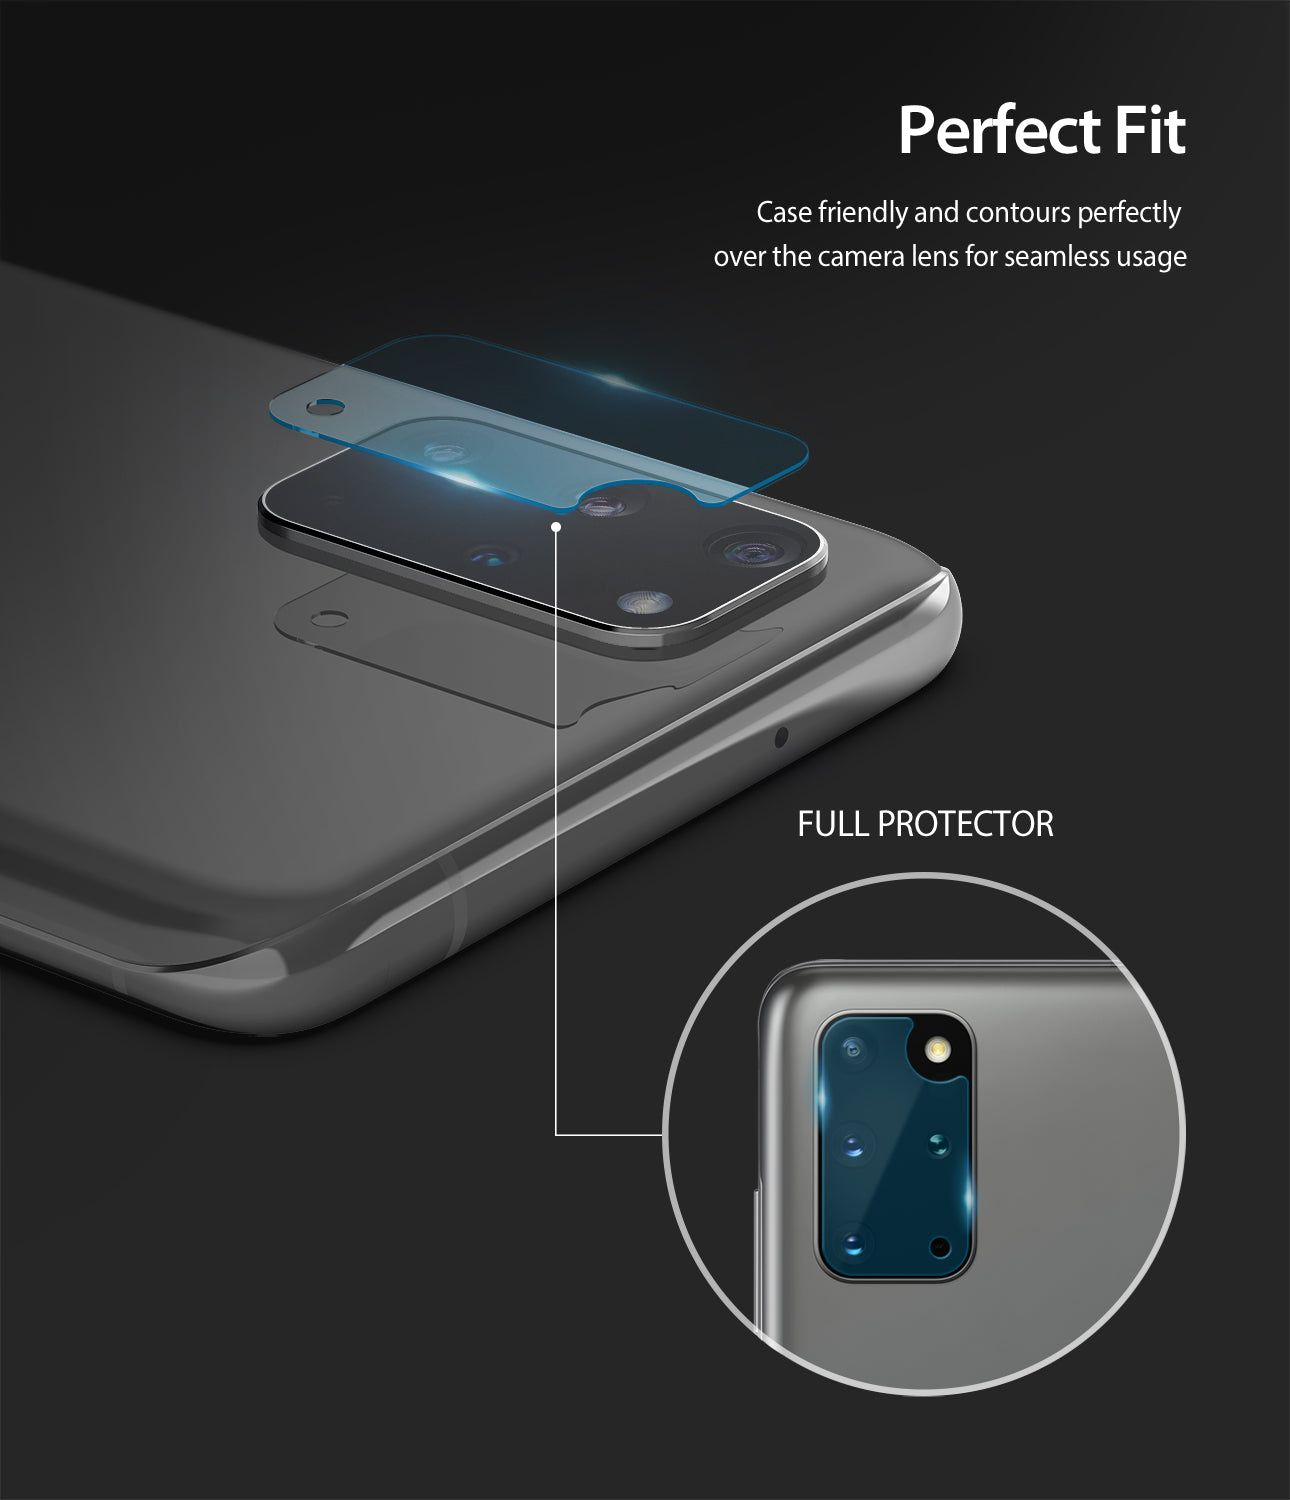 case friendly and contours perfectly over the camera lens for seamless usage